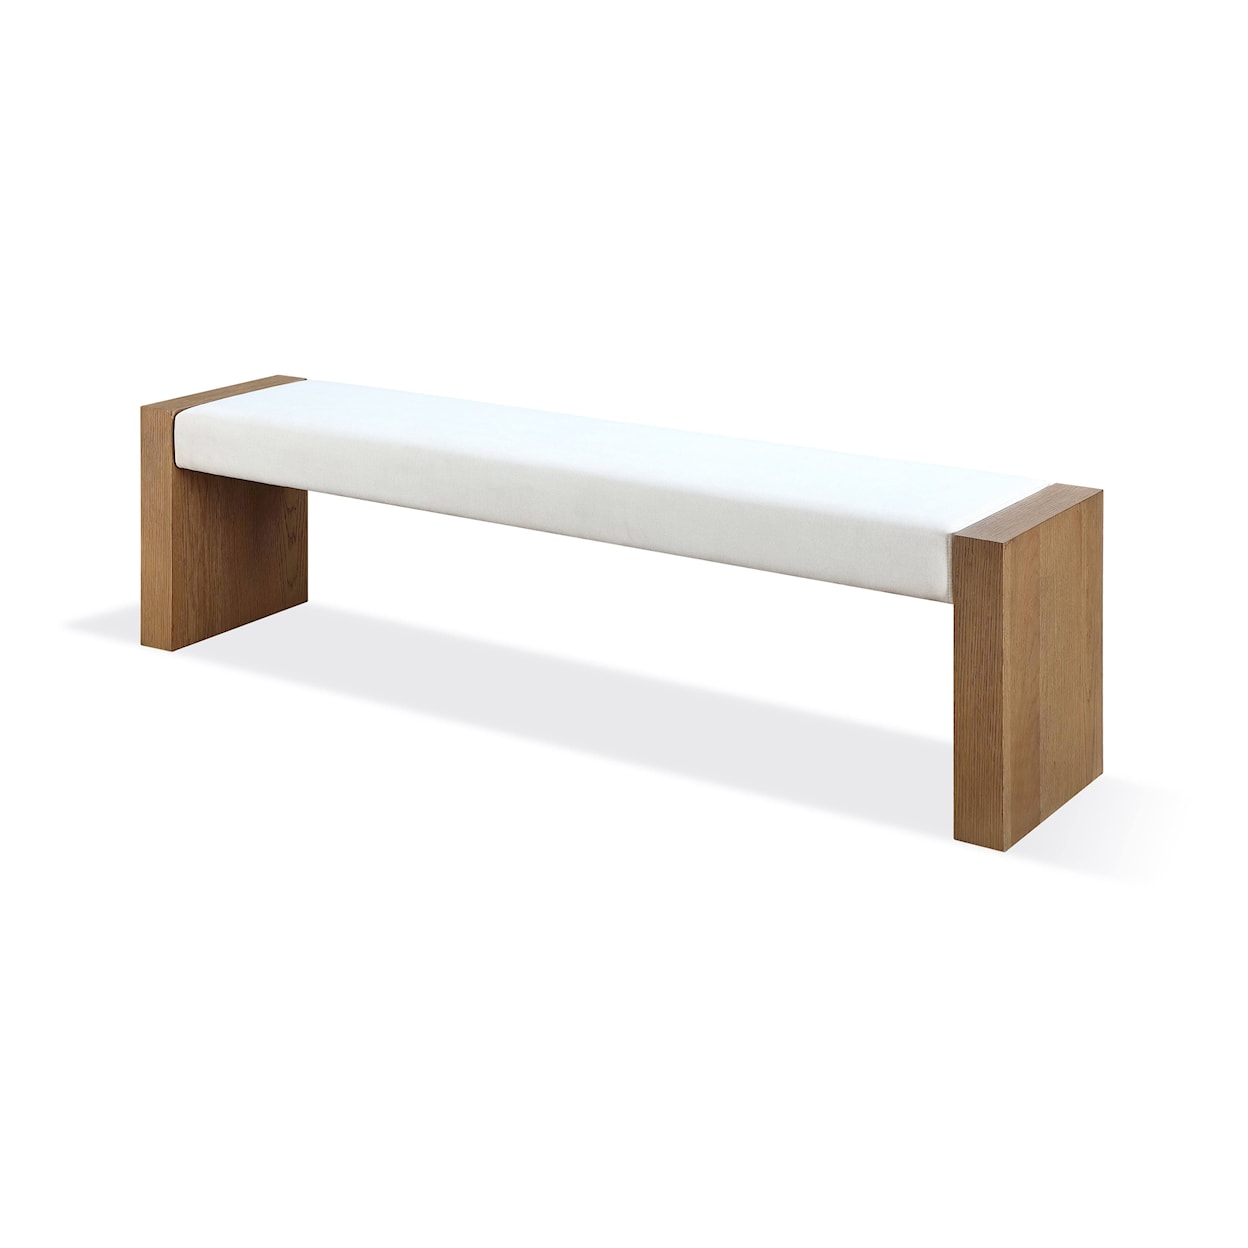 Modus International One Dining Bench Plank - Pearl/Bisque